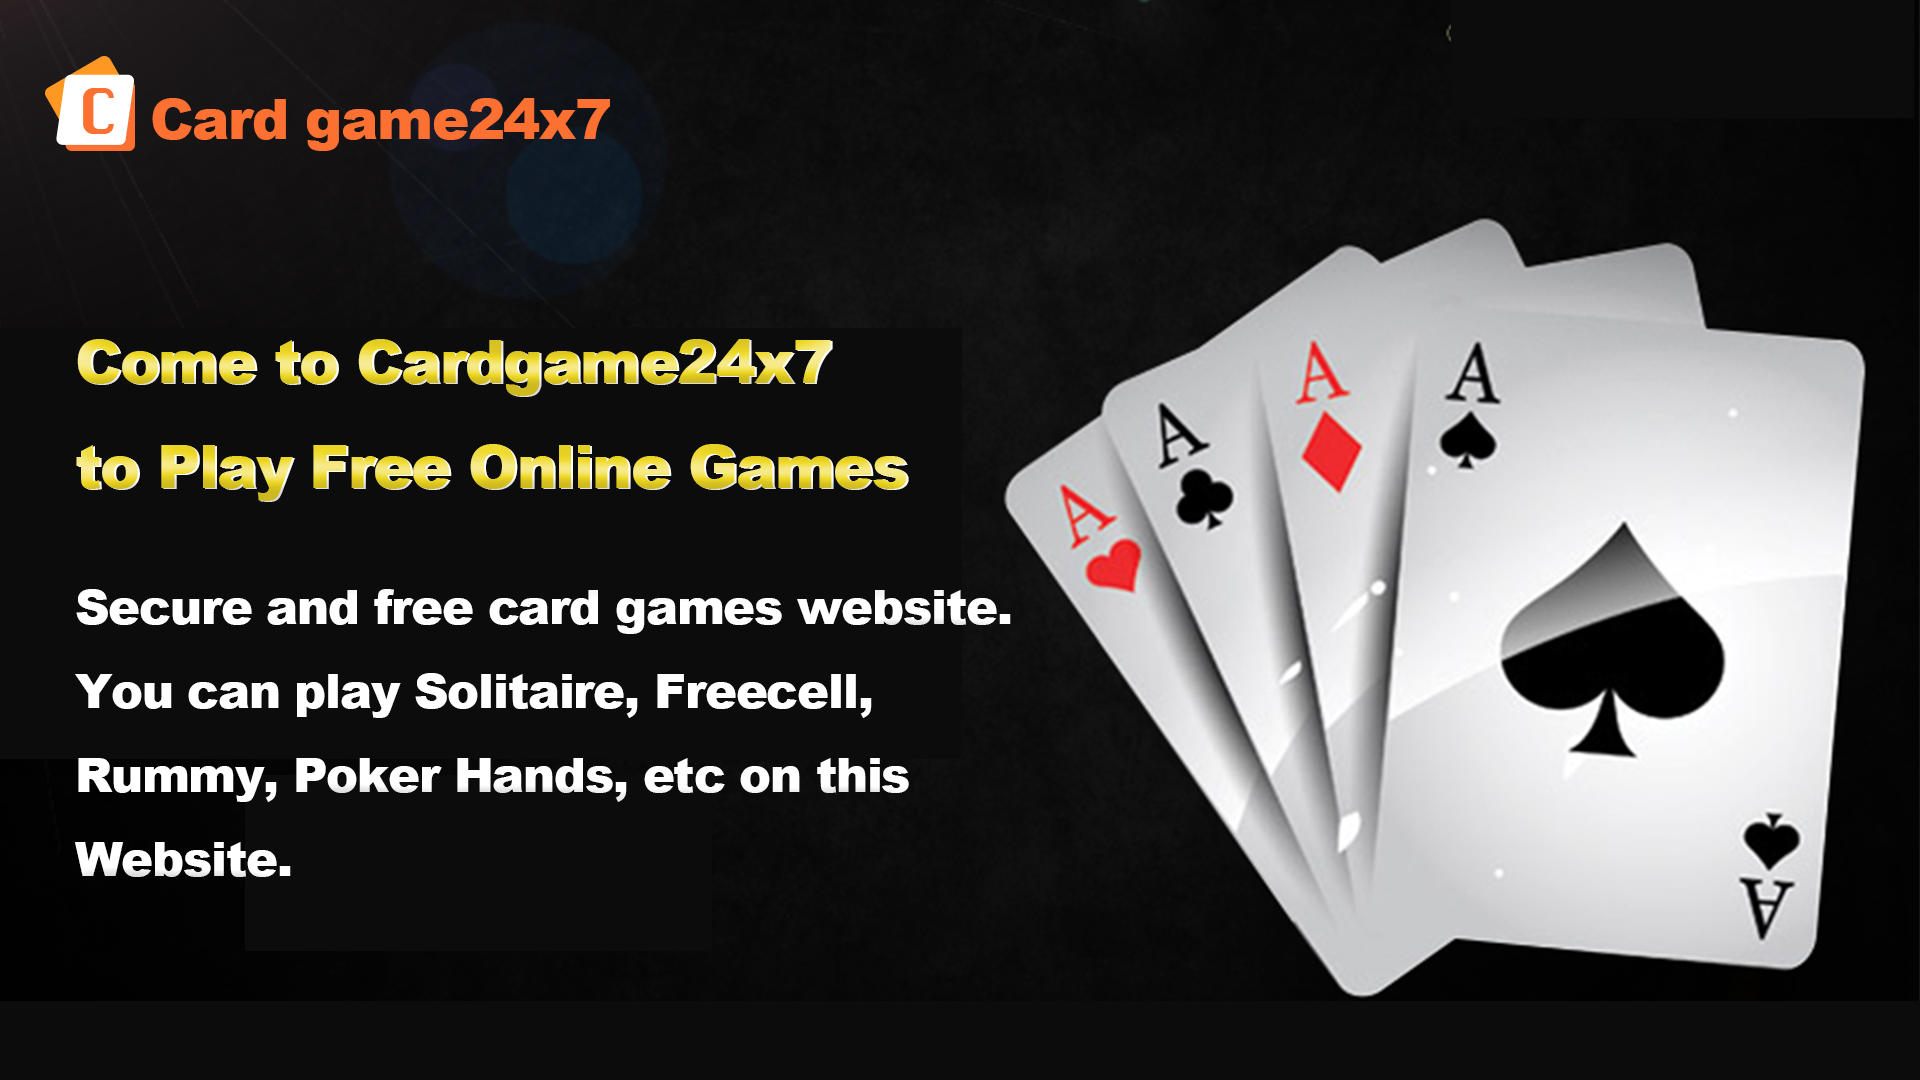 Come to Cardgame24x7 to Play Free Online Games